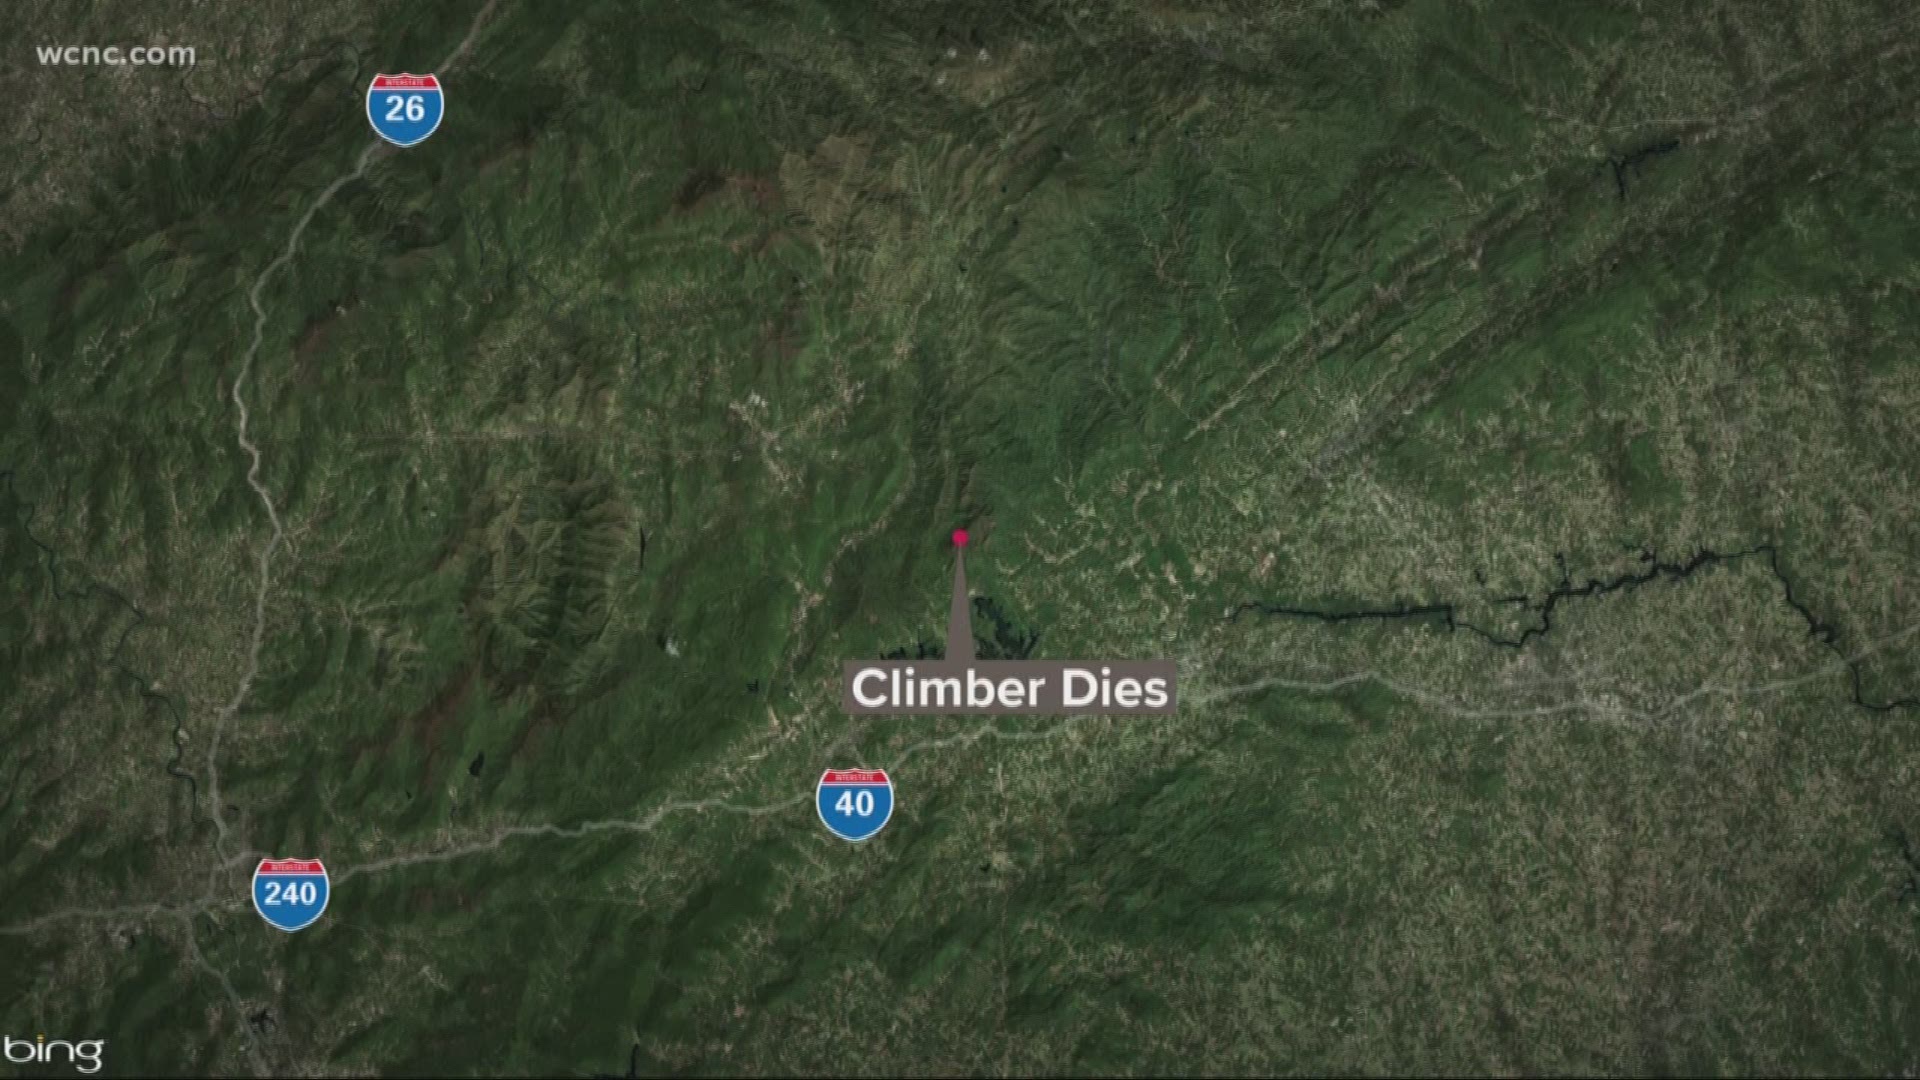 Officials say he was free climbing, meaning he was climbing without a rope or harness, in one of the most dificult parts of the gorge.